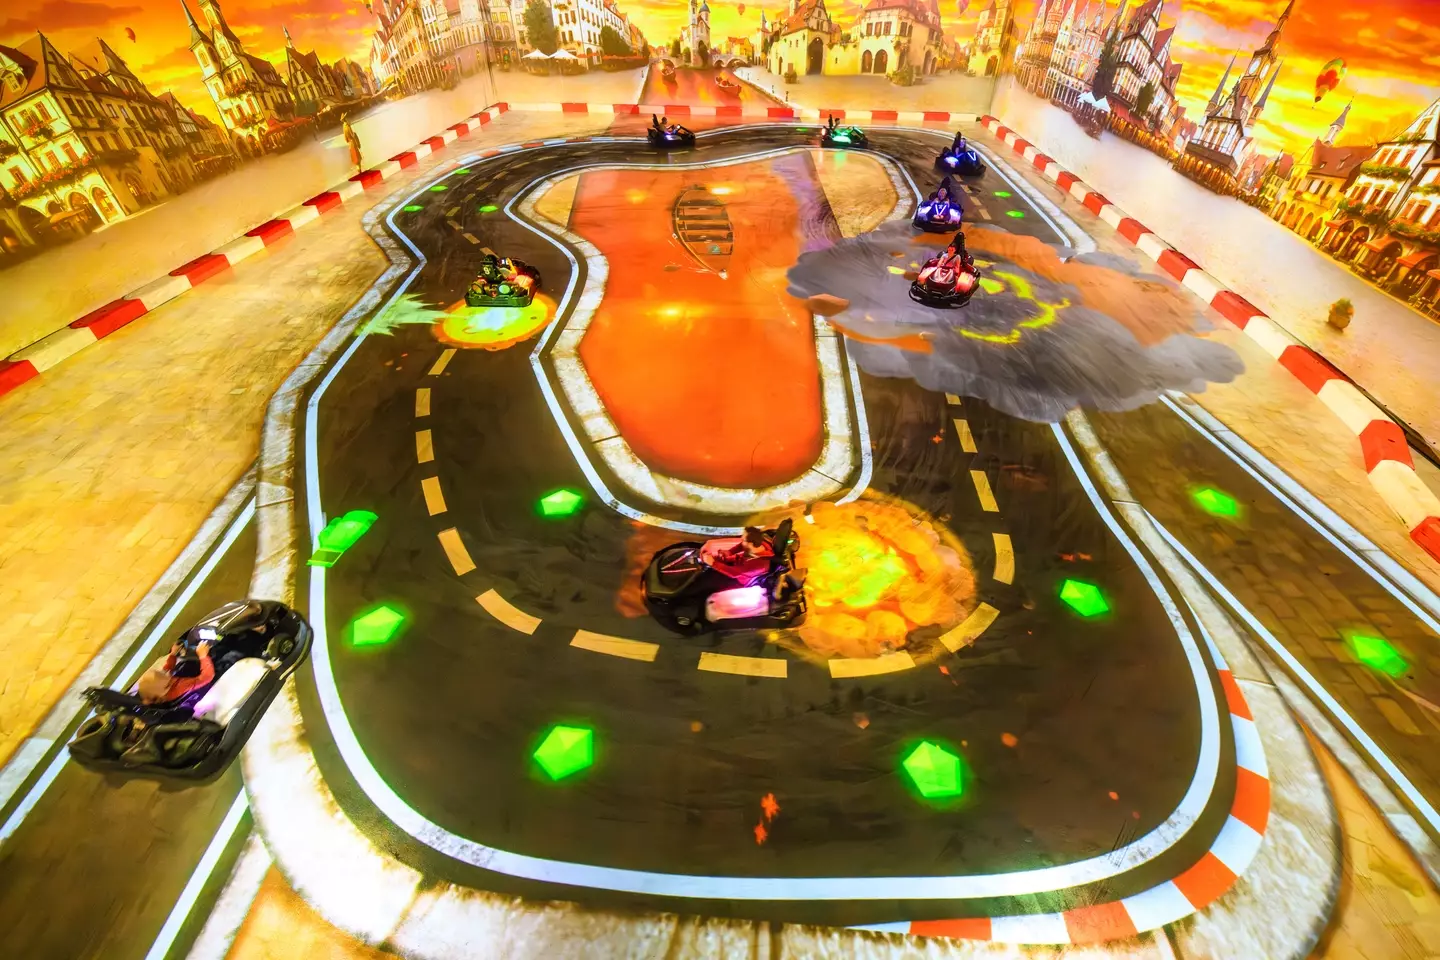 One of Chaos Karts' new tracks include the Venetian Carnival